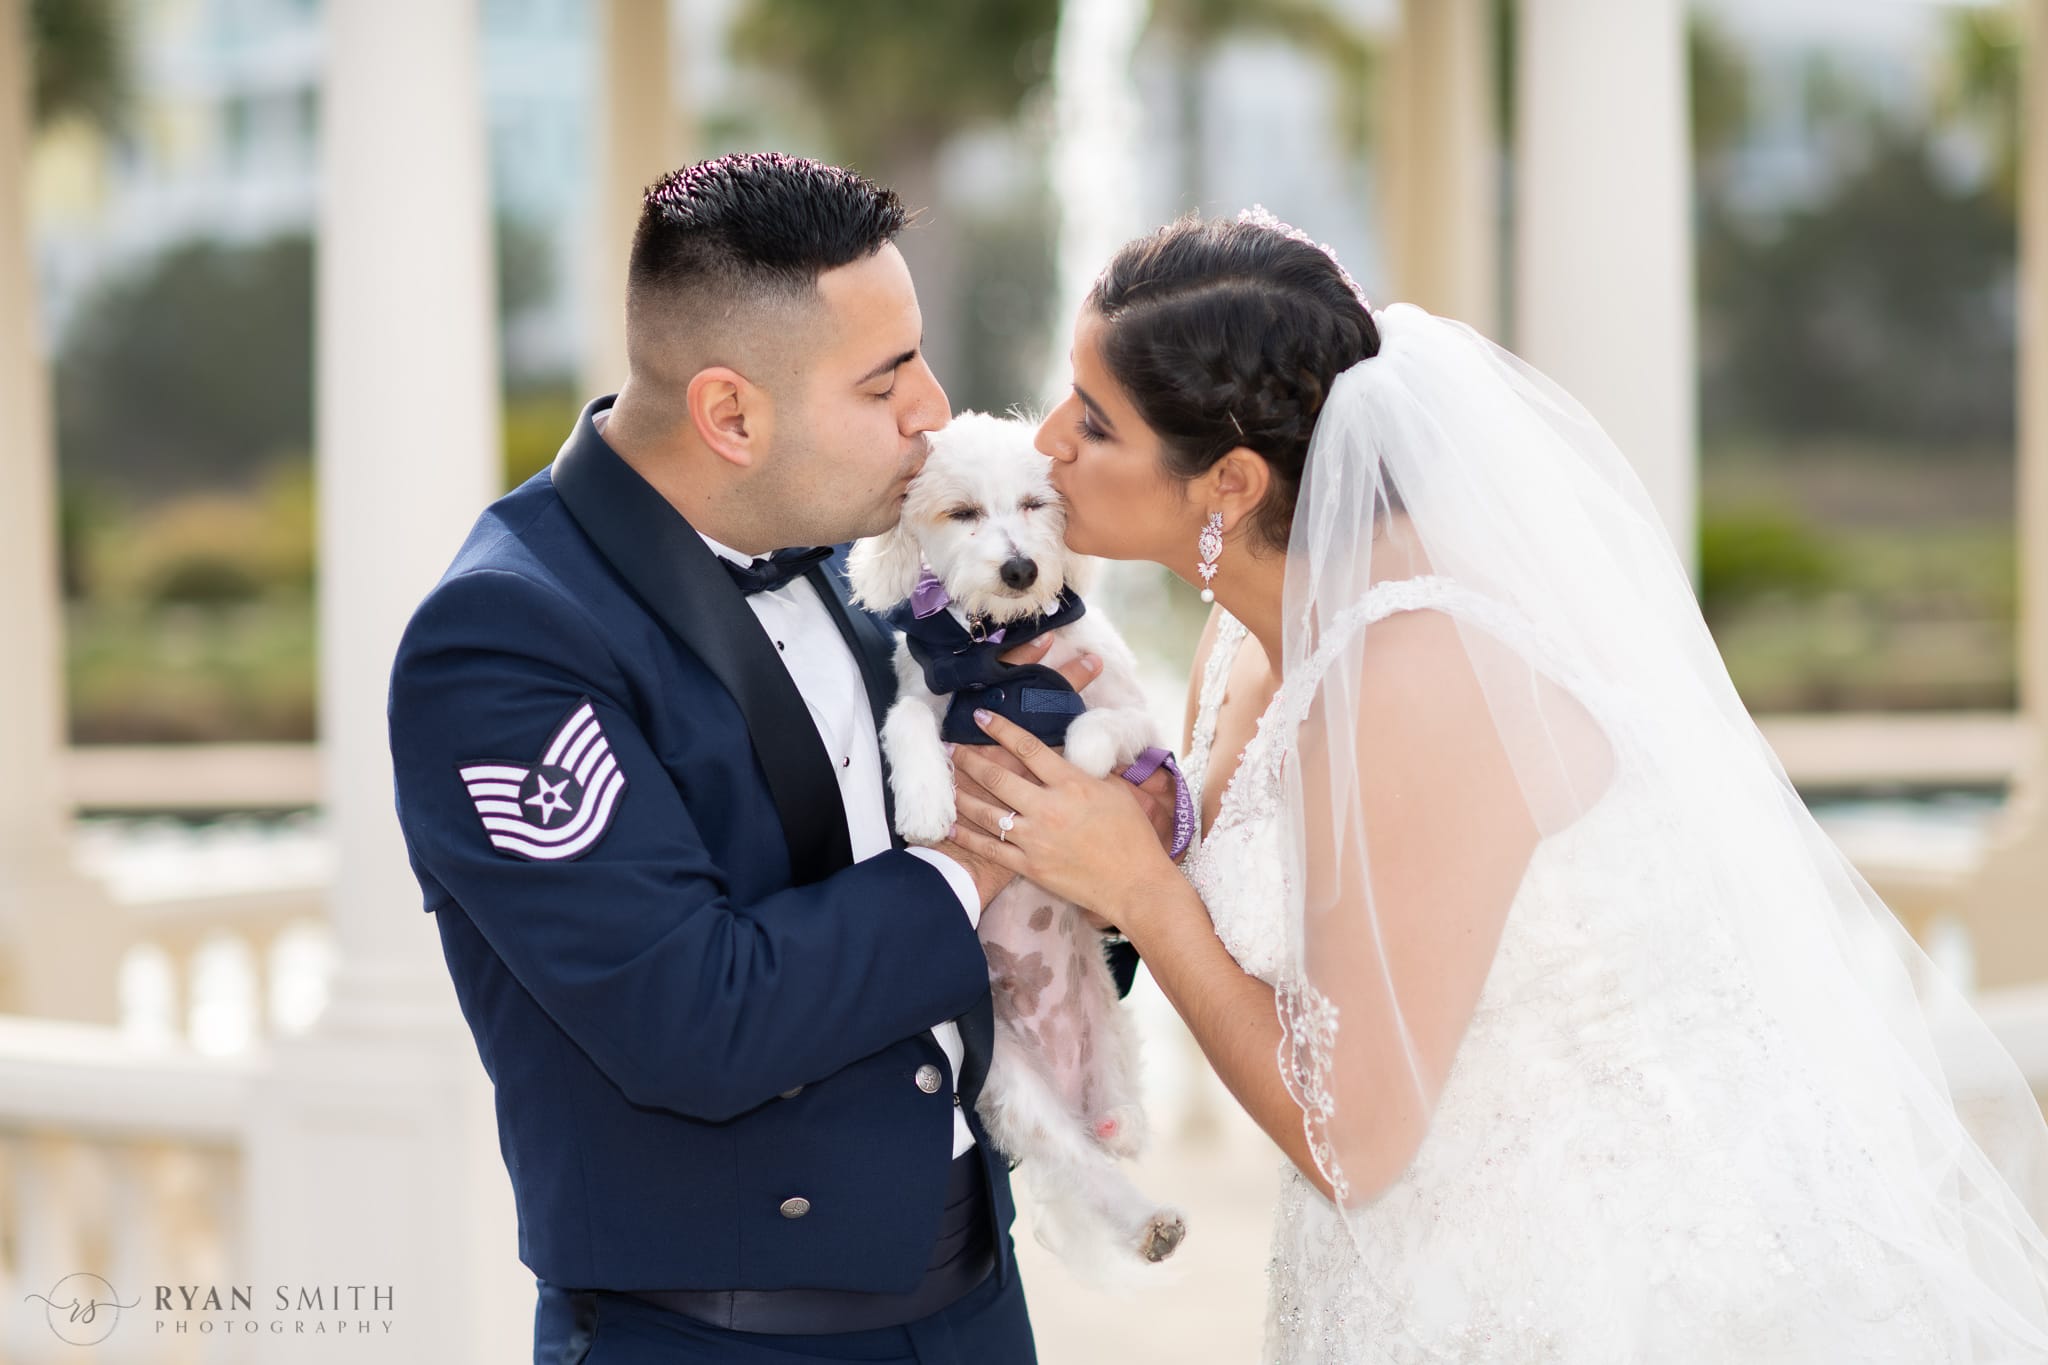 Bride and groom kissing their dog on the head - 21 Main Events at North Beach